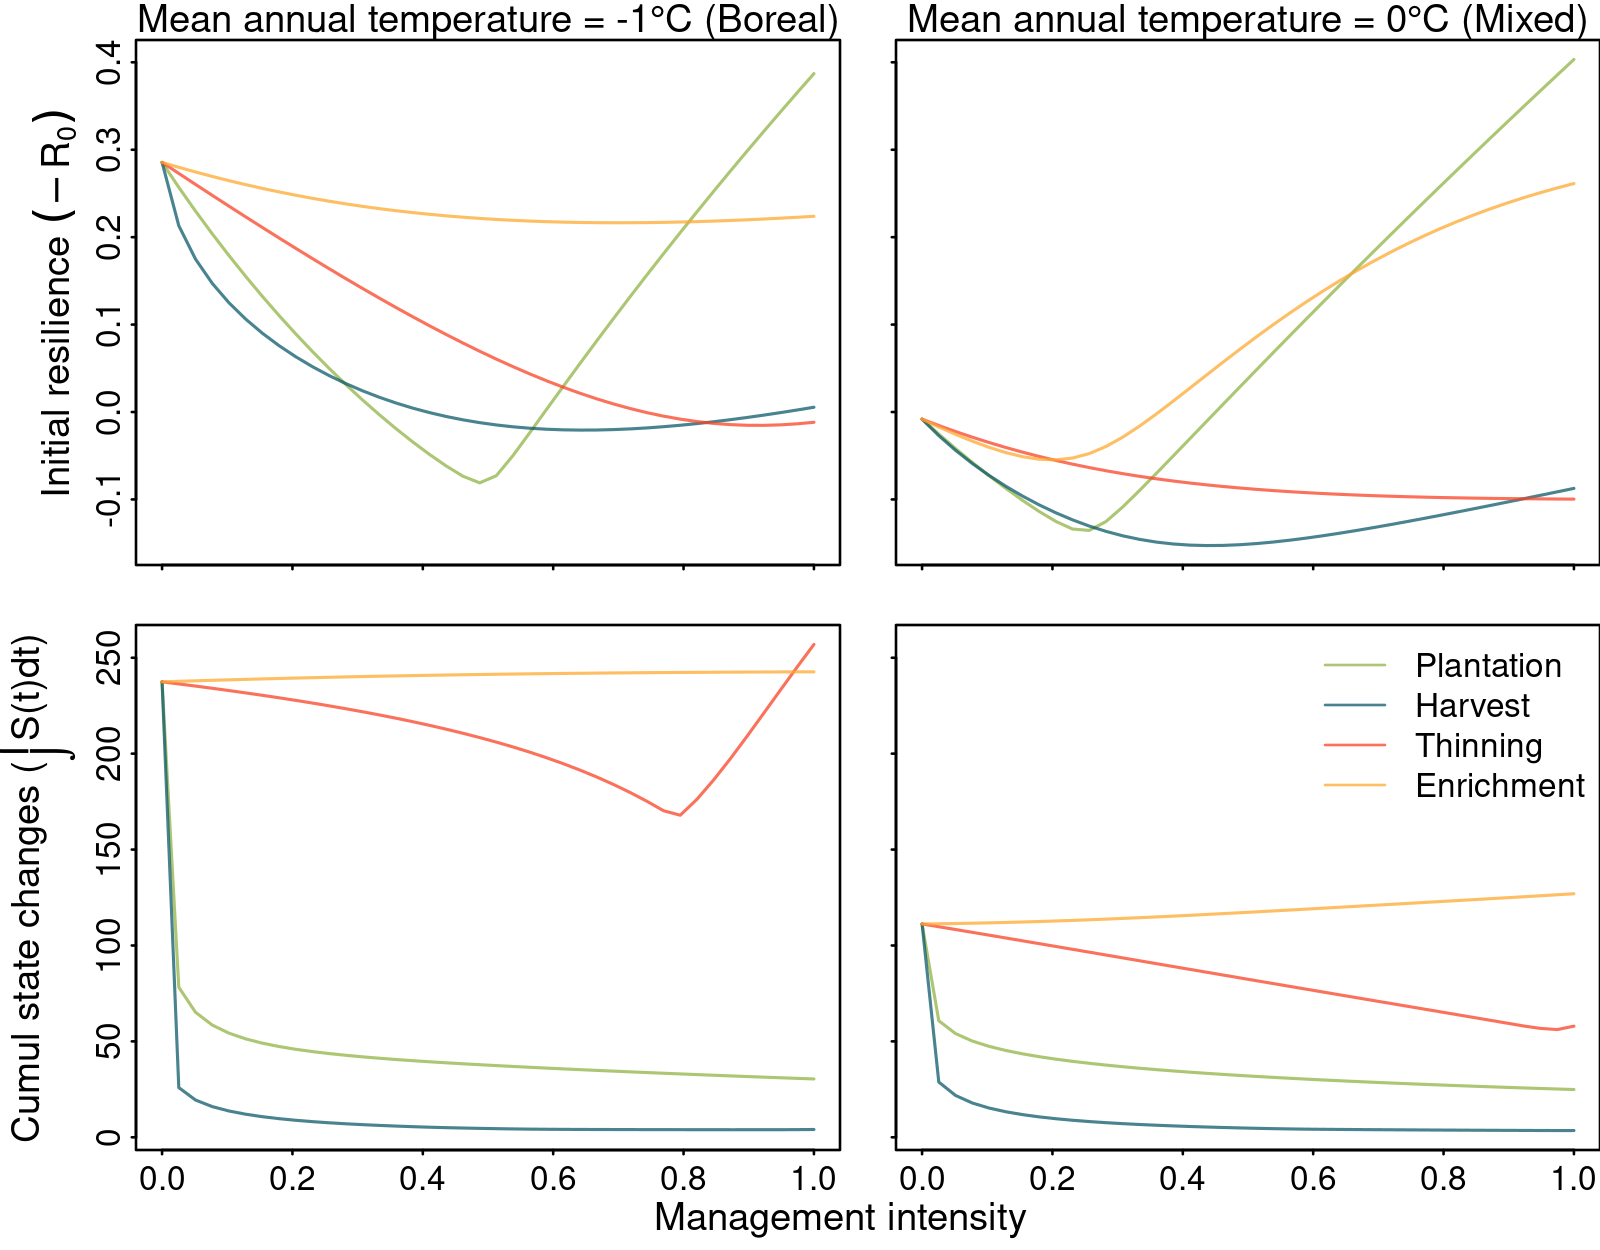 Figure 3: Transient dynamics following warming temperature along with the increasing management intensity for plantation, harvest, thinning and enrichment planting. Climatic condition is fixed at the boreal (mean annual temperature of -1; left panels) and the boreal/mixed transition (mean annual temperature of 0; right panels) regions. Transient dynamics are described by (i) exposure or the shift of forest states to the new equilibrium; (ii) asymptotic resilience or the rate in which the system recovery to equilibrium; (iii) sensitivity or the time for the state reach equilibrium after warming temperature; (iv) initial resilience or the reactivity of the system after warming temperature; and (v) vulnerability or the cumulative amount of state changes after warming temperature.